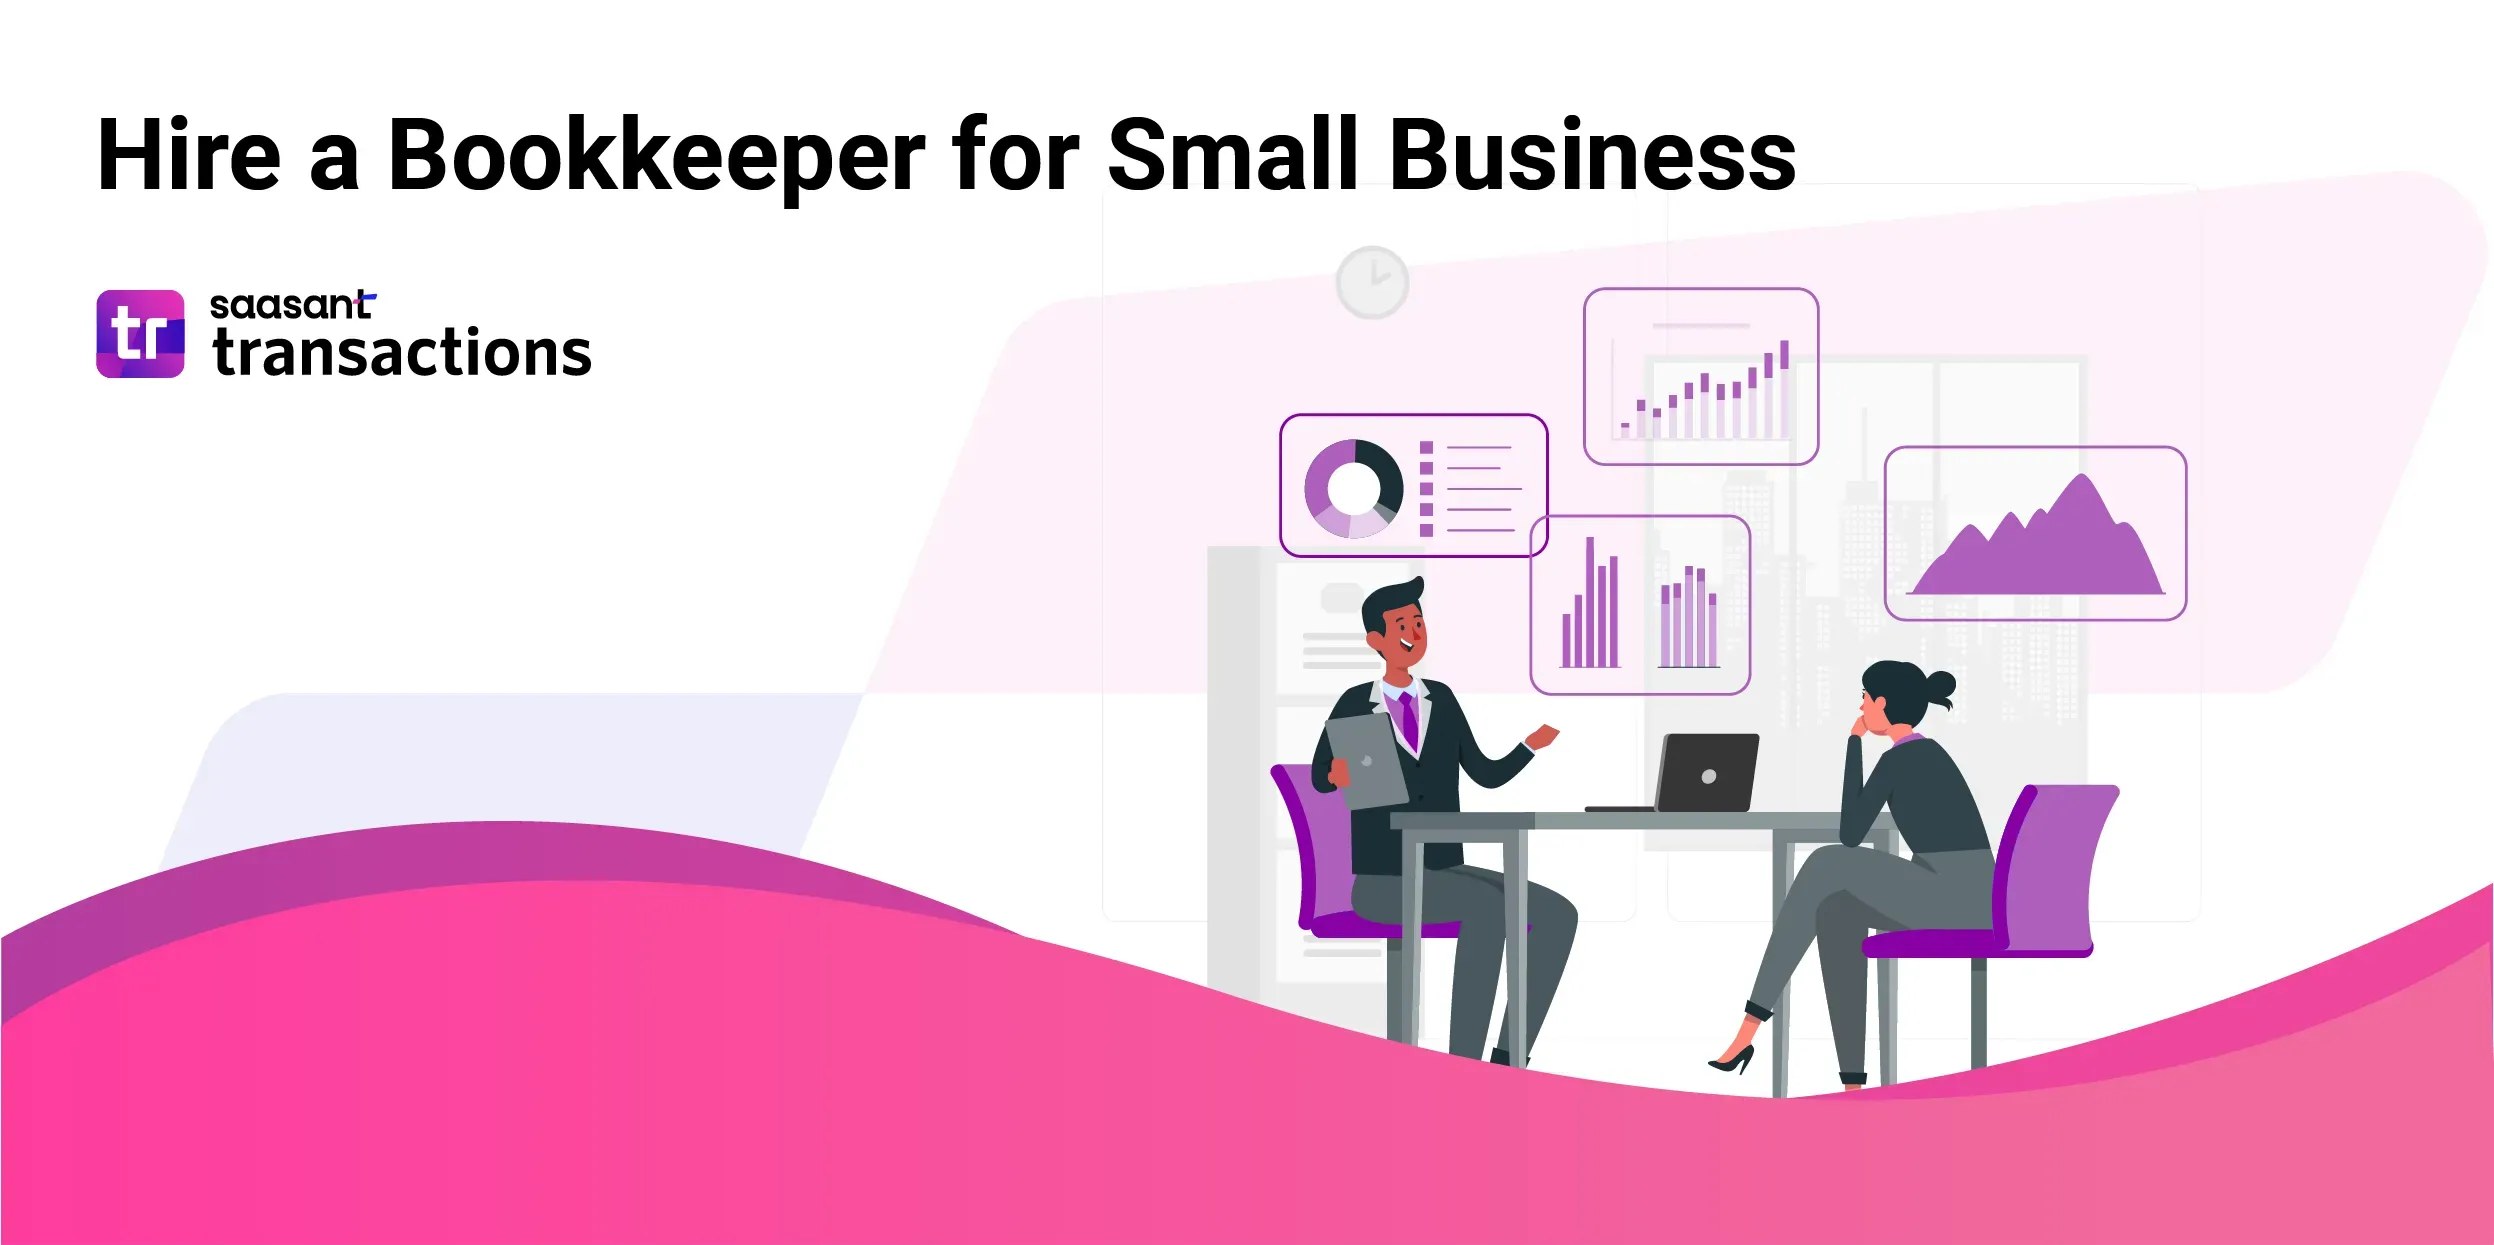 How Should You Hire a Bookkeeper for Your Small Business?